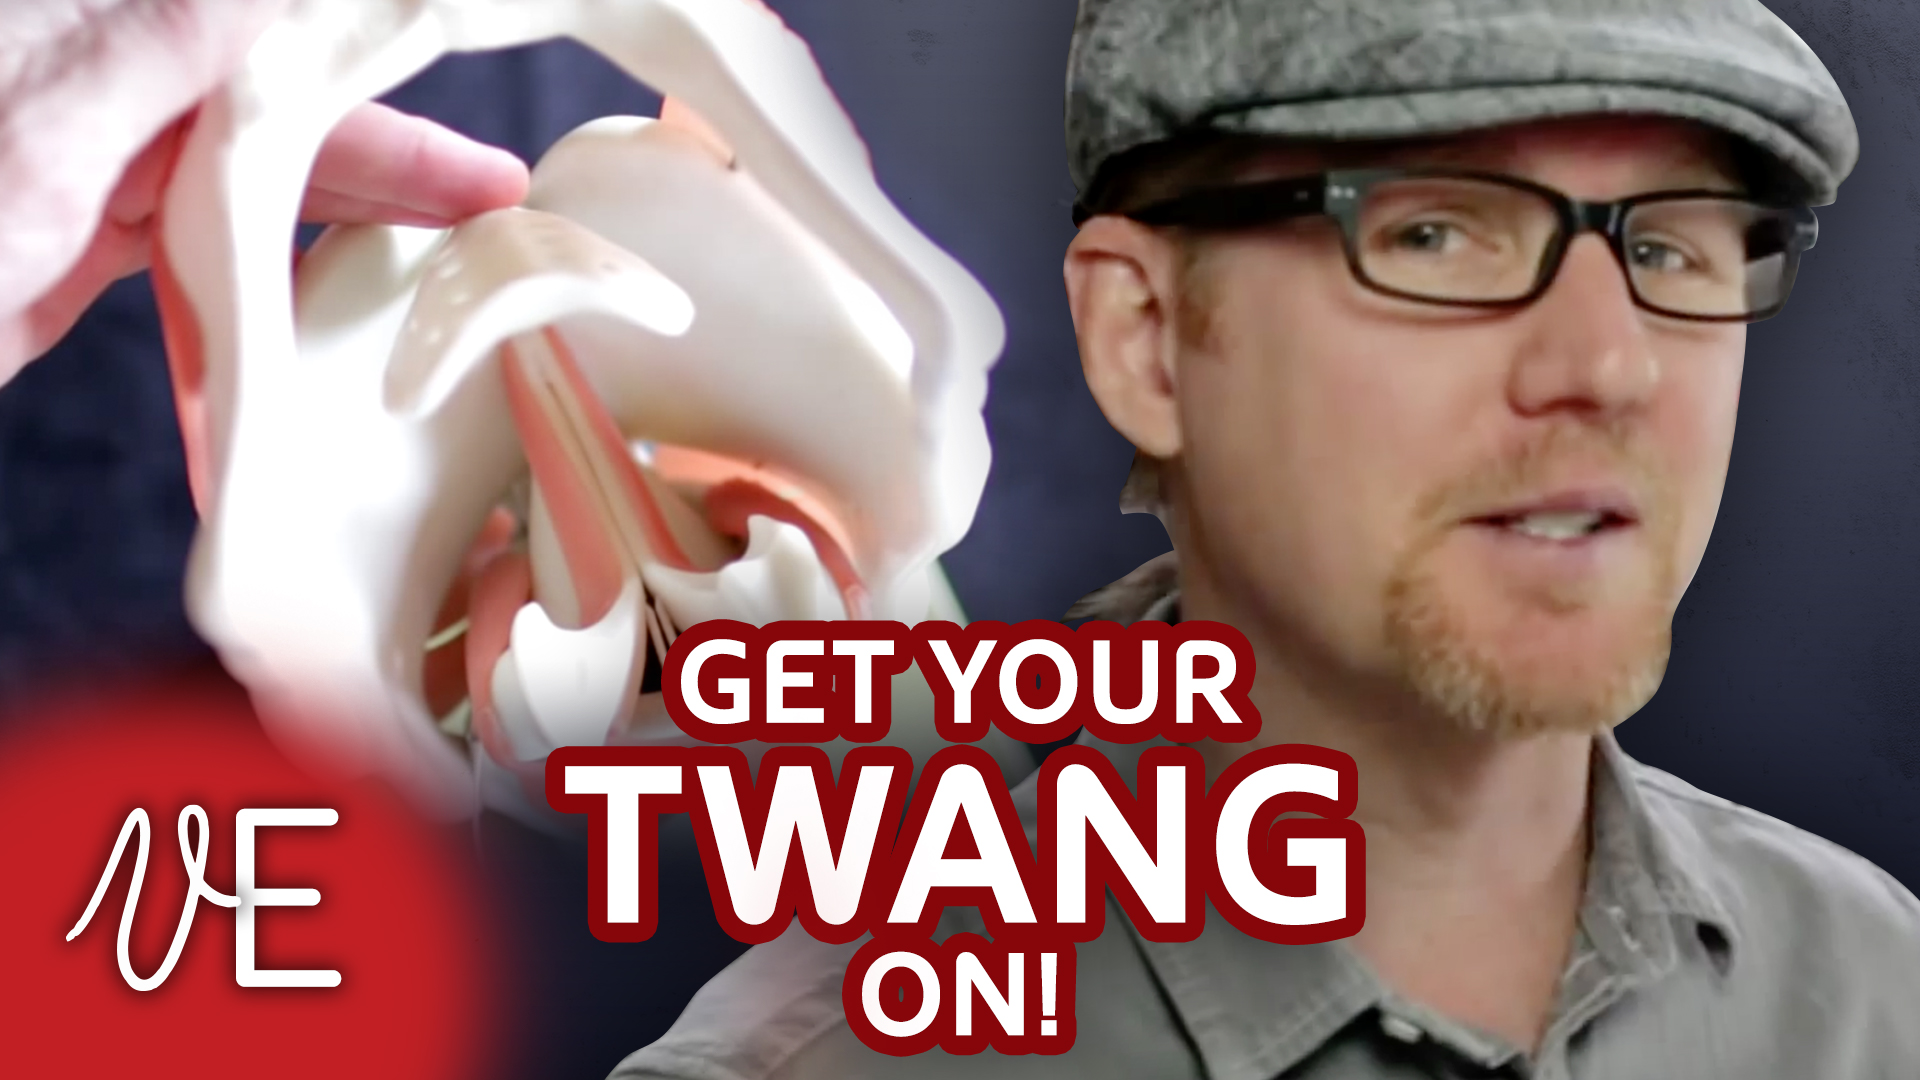 What is Twang Singing? Learn about the benefits of singing with Twang.